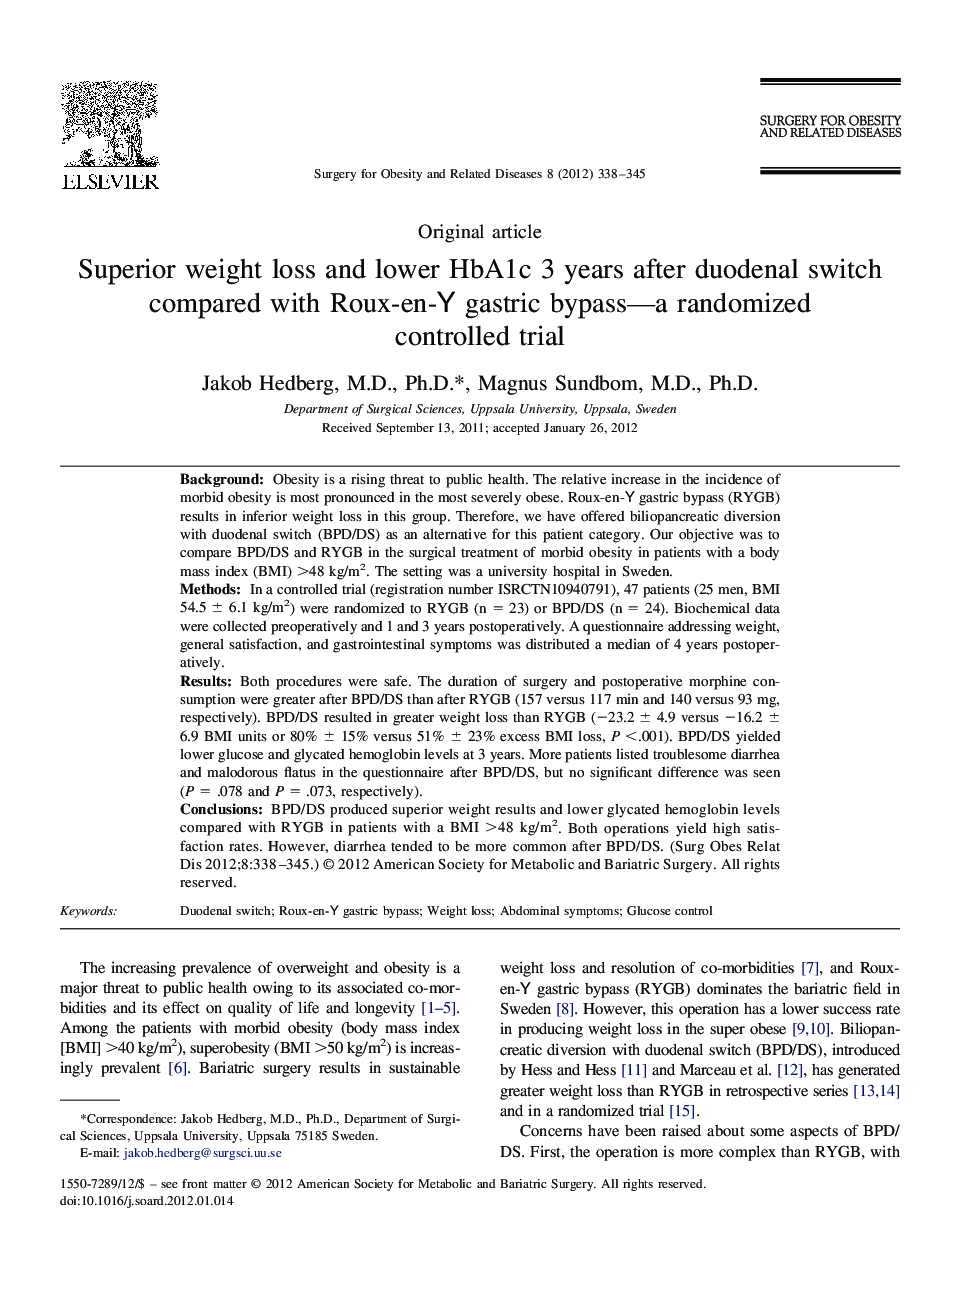 Superior weight loss and lower HbA1c 3 years after duodenal switch compared with Roux-en-Y gastric bypass-a randomized controlled trial